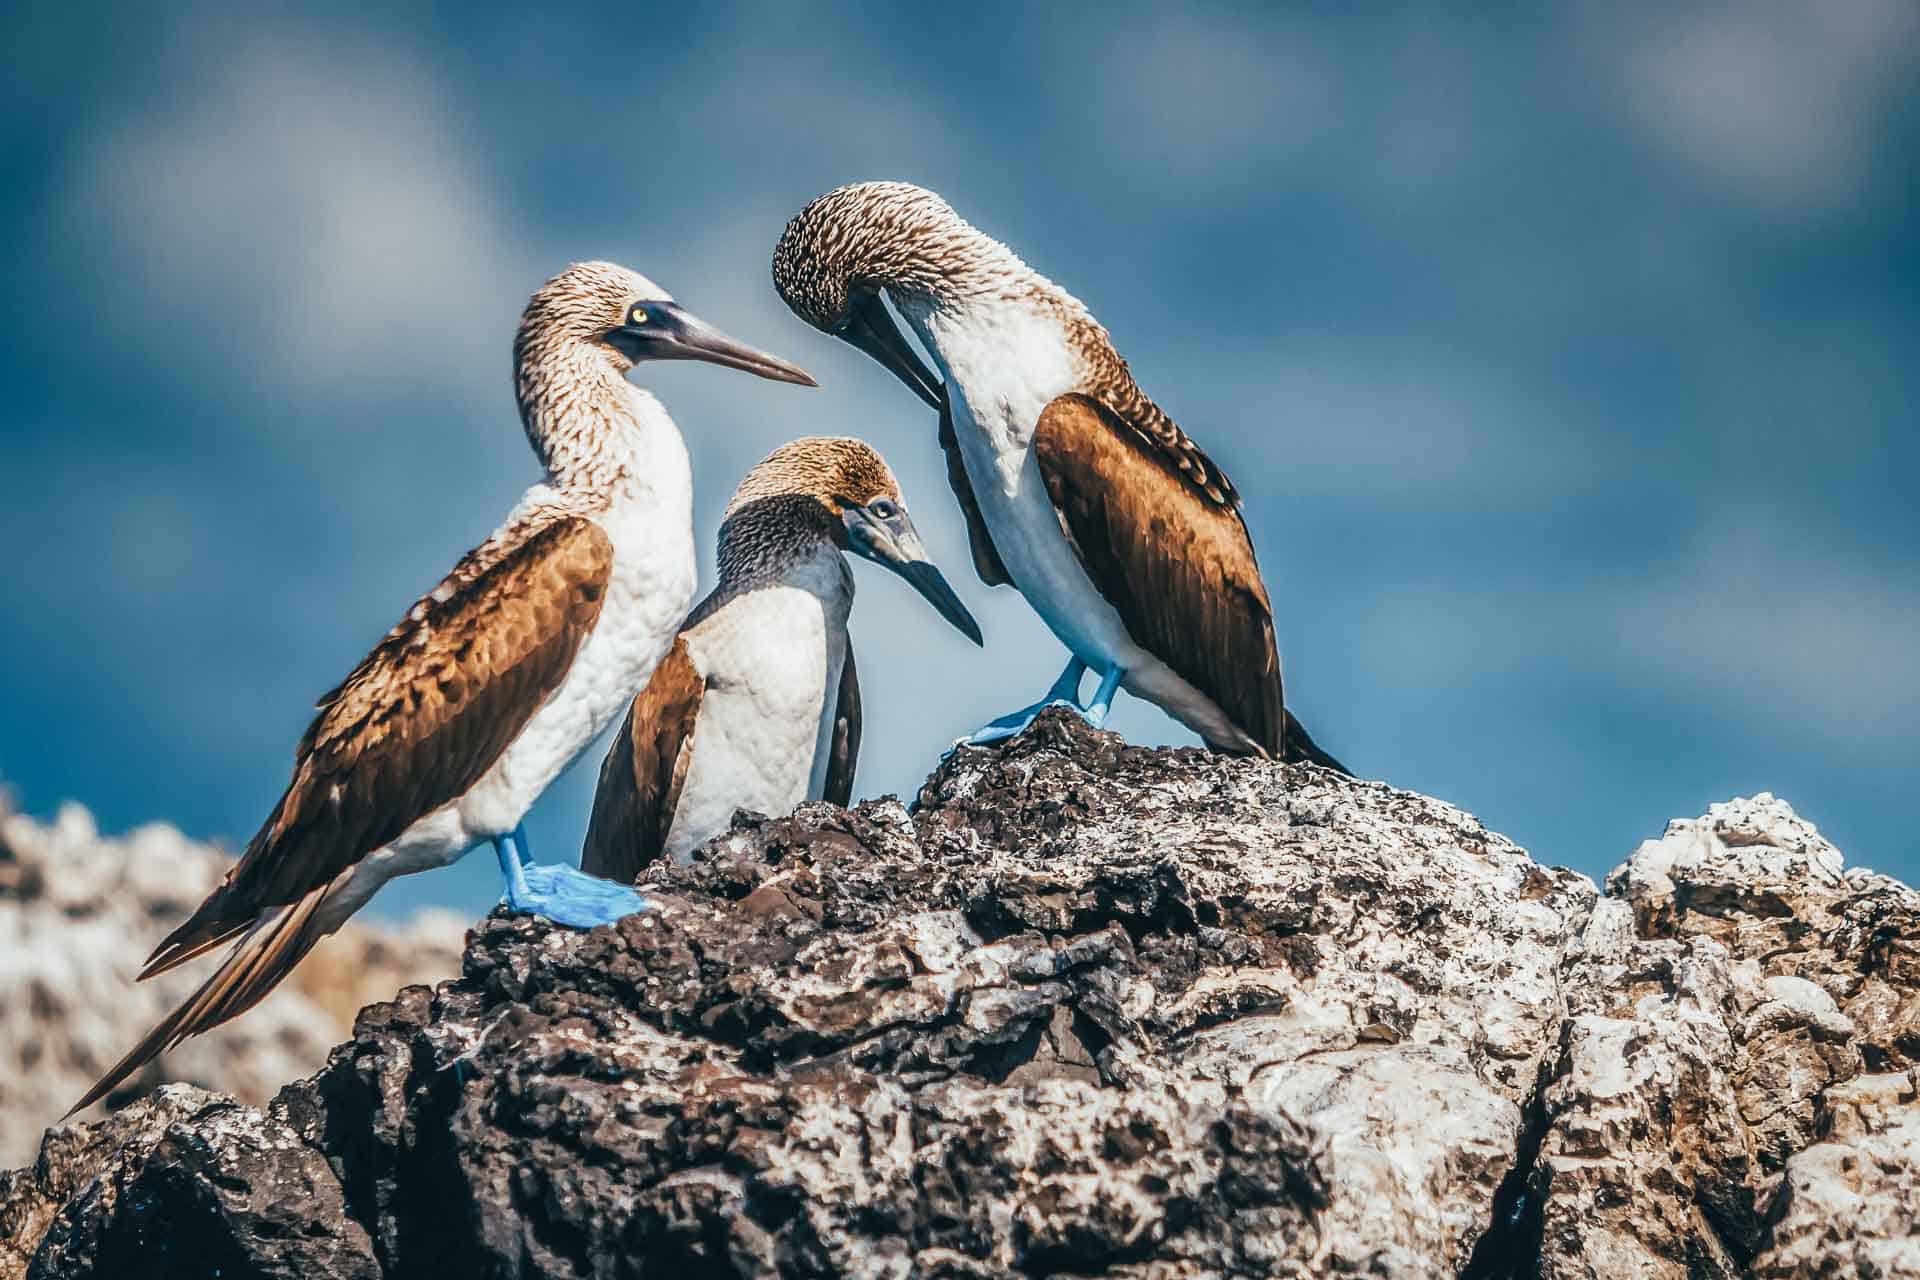 Unique Galapagos Islands Animals in Photos | The Planet D